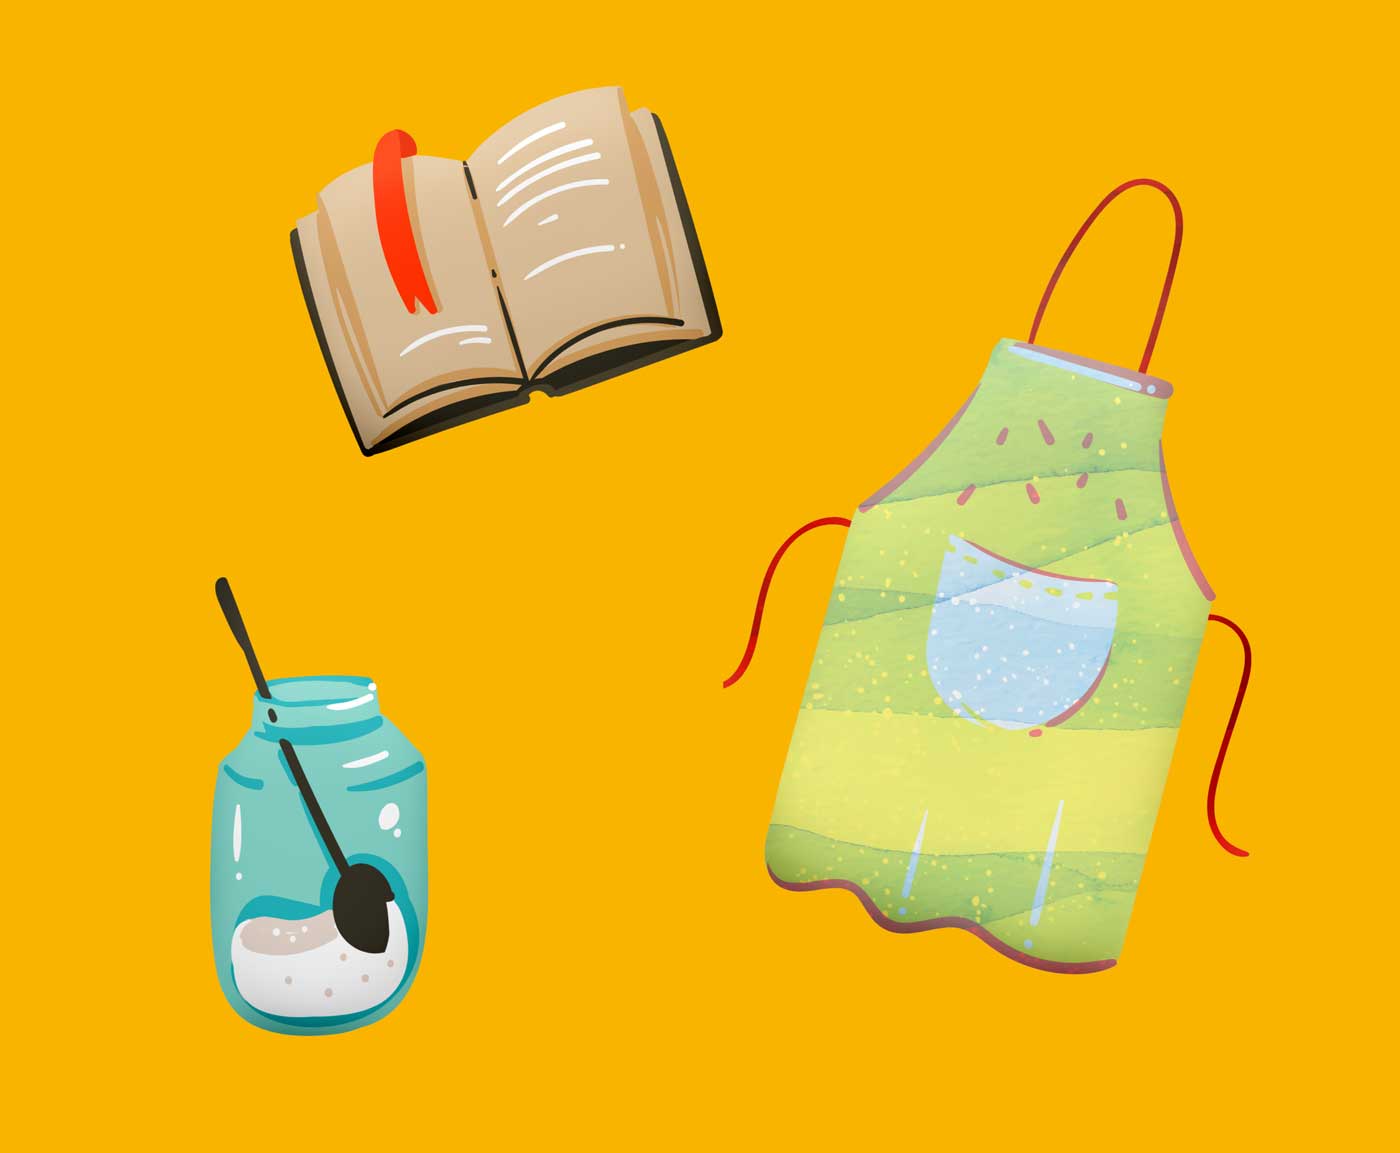 Colourful illustrations of an apron, a jar of sugar with a spoon in it, and a recipe book.